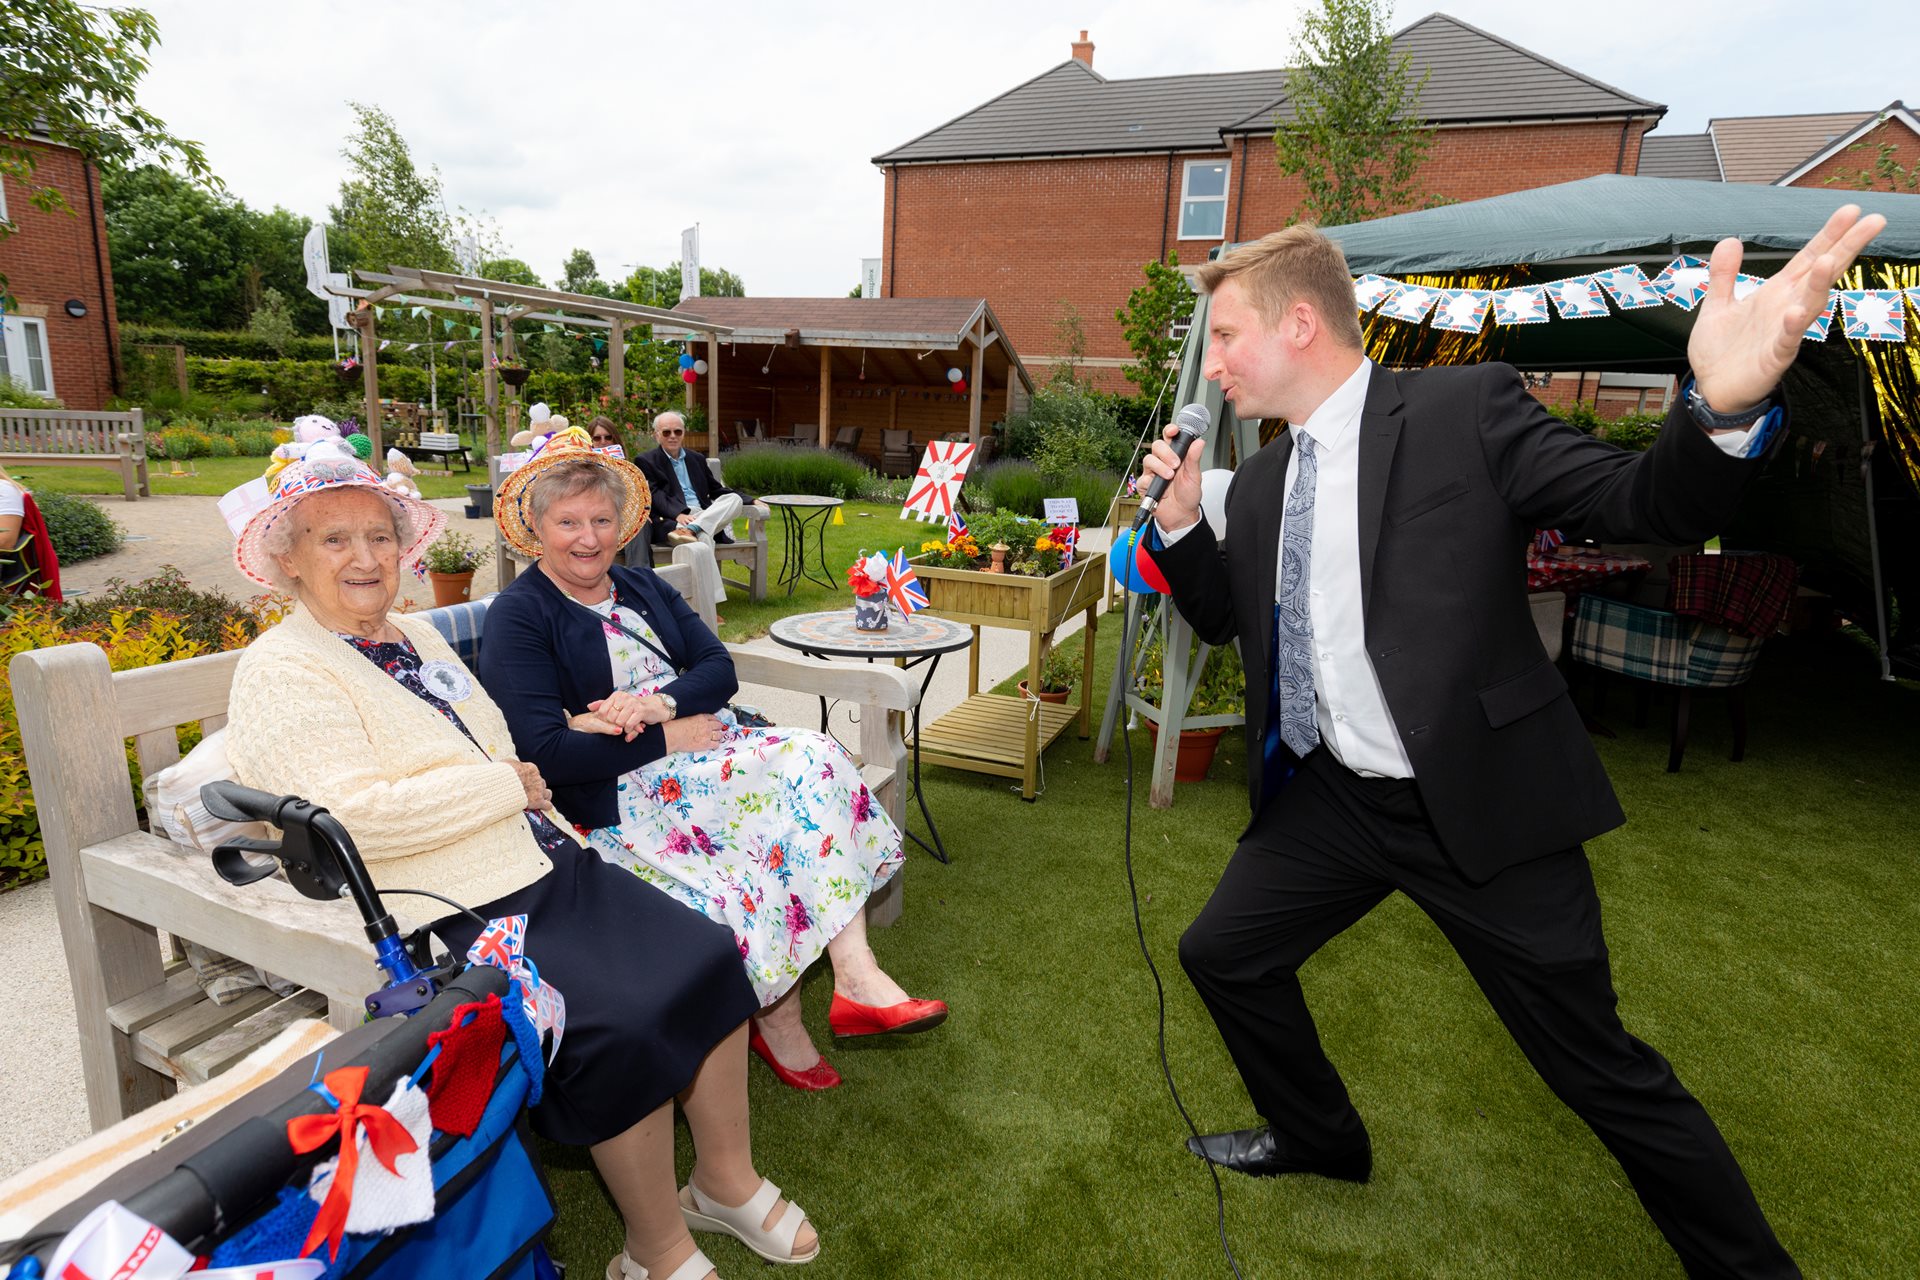 The royal treatment – Quorn care home residents celebrate the Platinum Jubilee in style